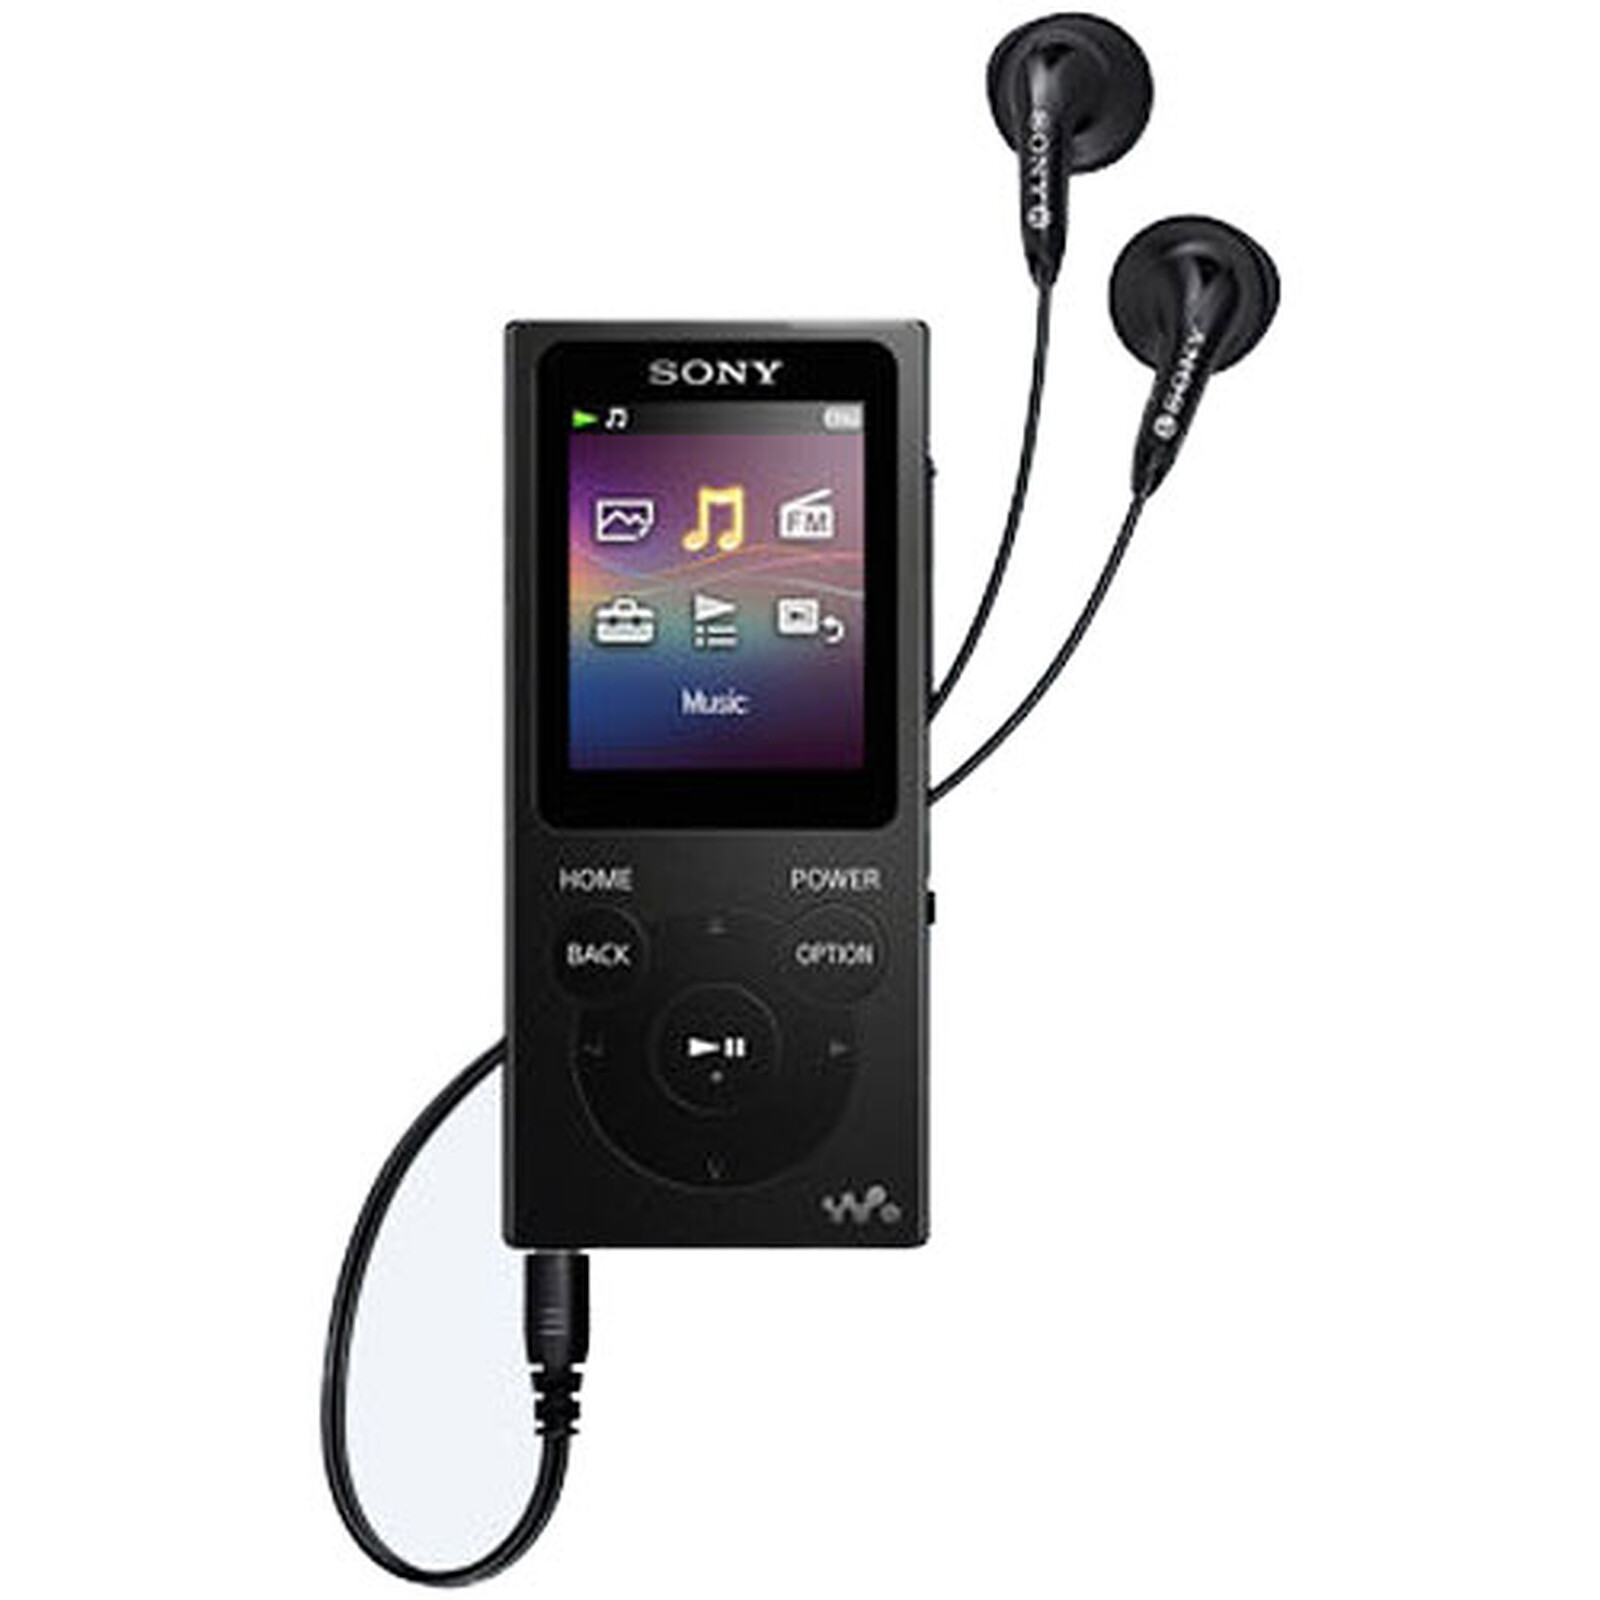 Sony NW-E393 negro - Reproductor MP3 y iPod - LDLC